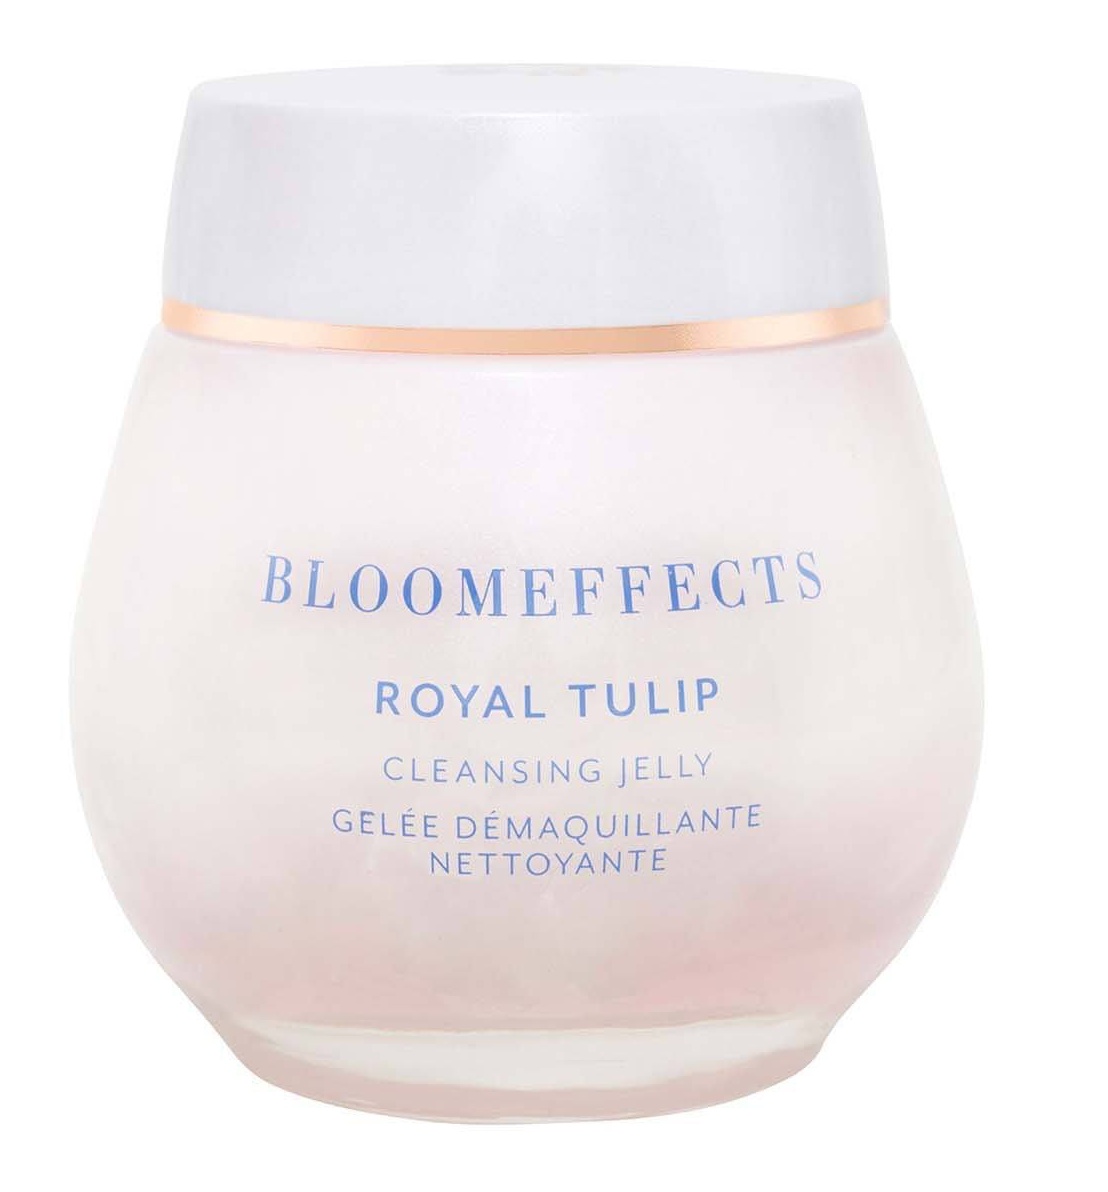 Bloomeffects Royal Tulip Cleansing Jelly